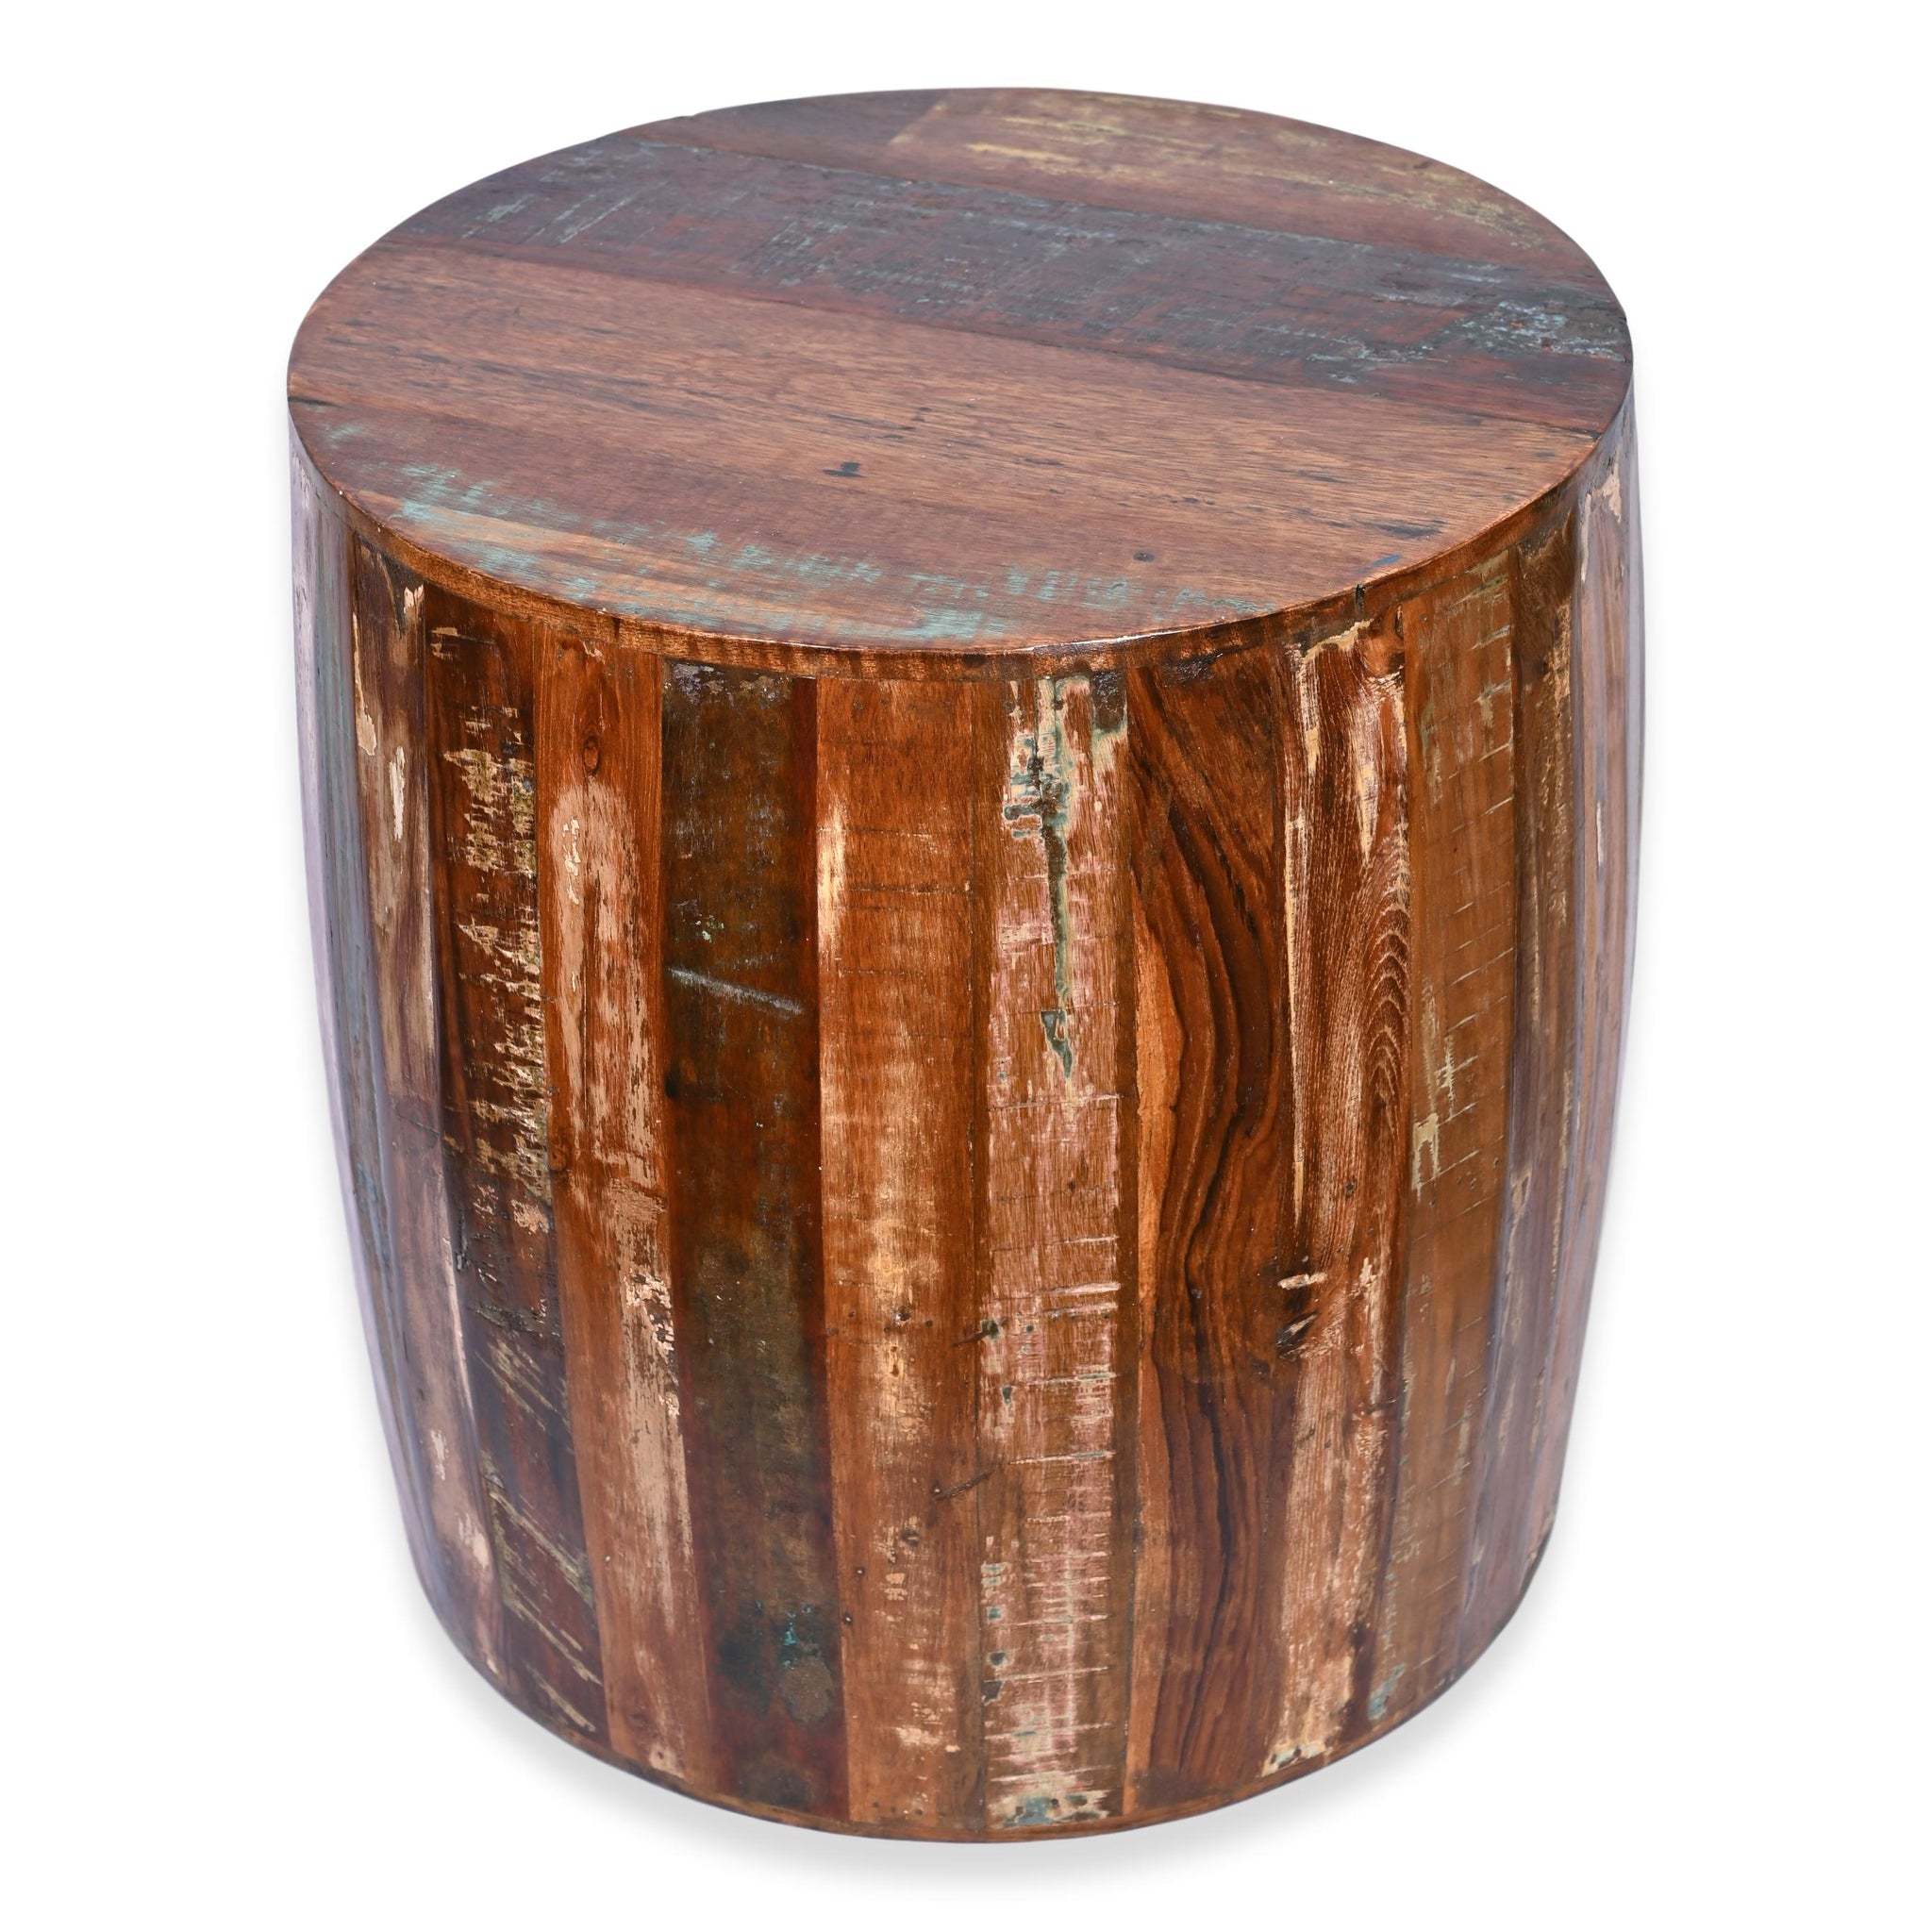 Impeccably Hand Crafted Reclaimed Wood Rustic 18 Inch Table Favors Handicraft